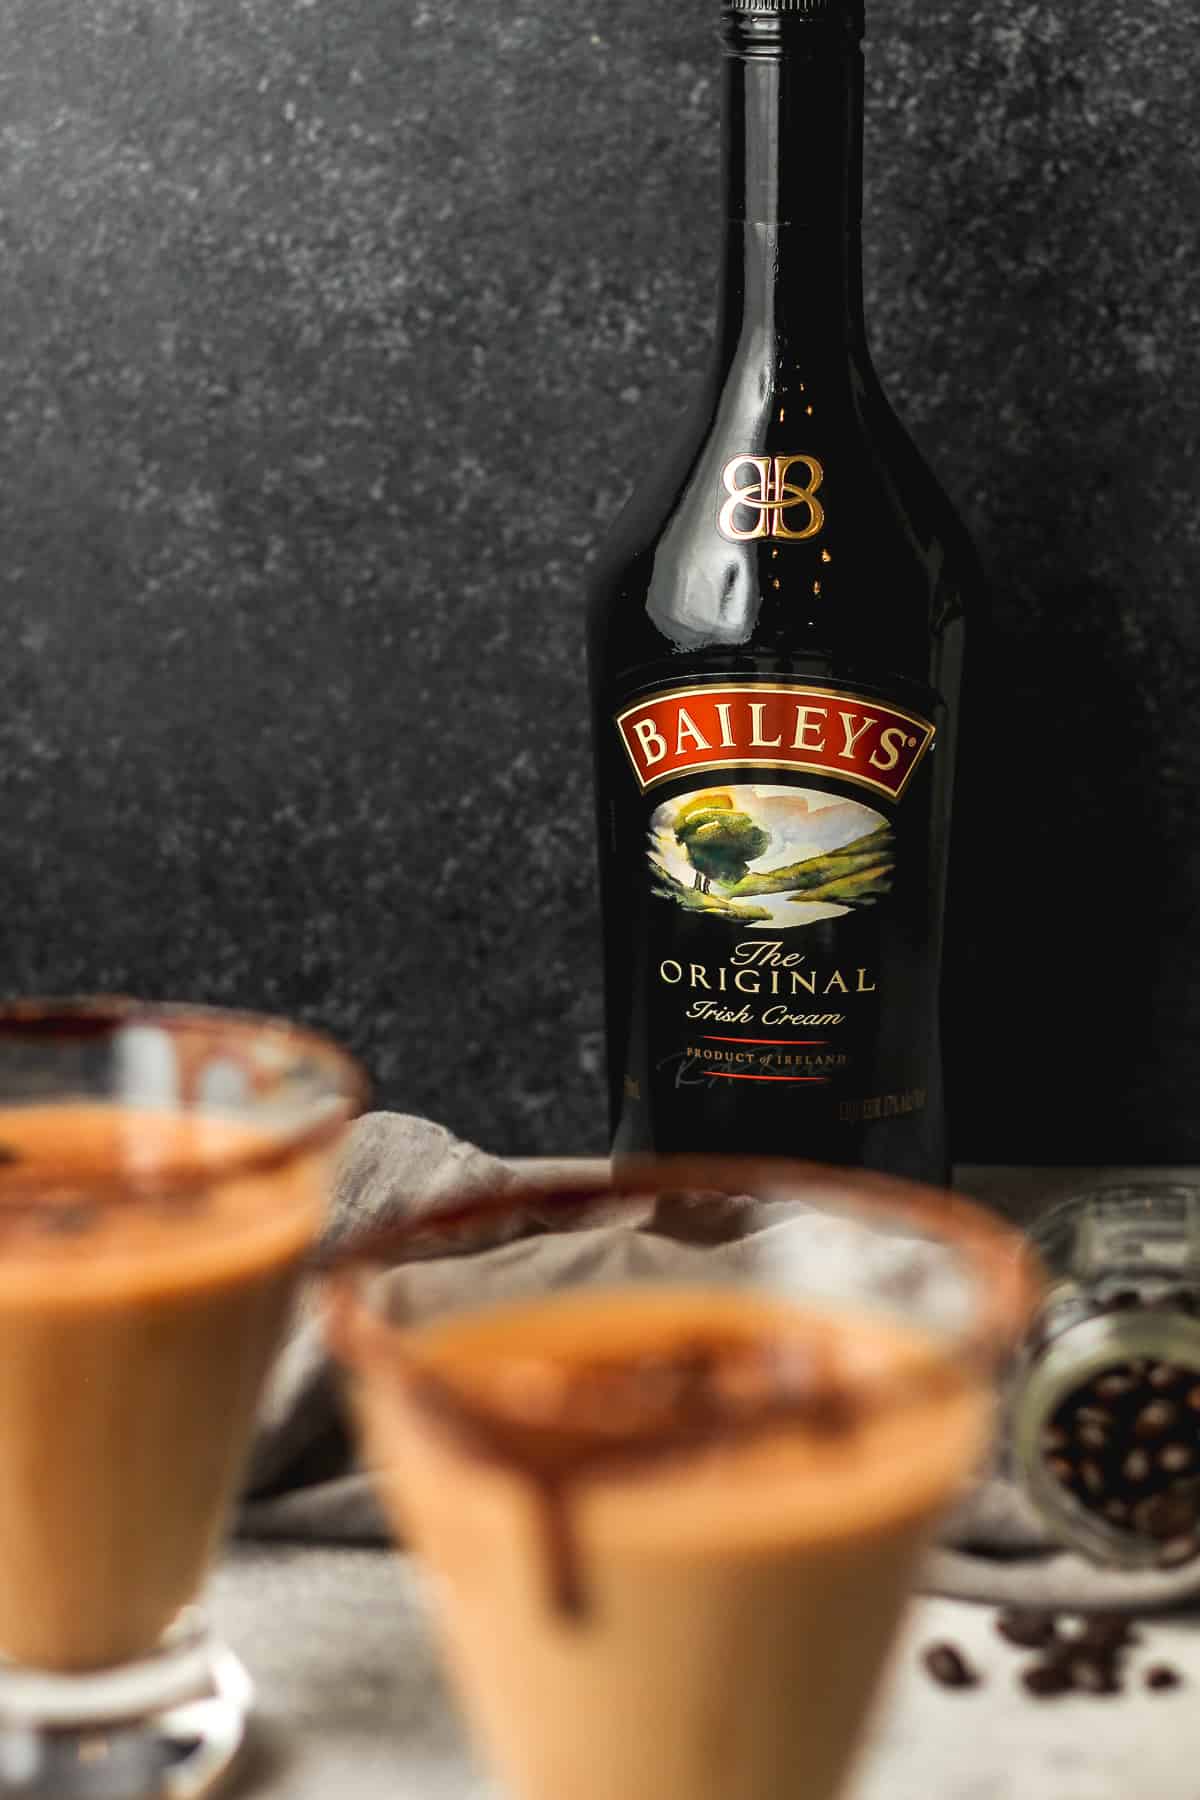 Side view of a bottle of Baileys in the background.